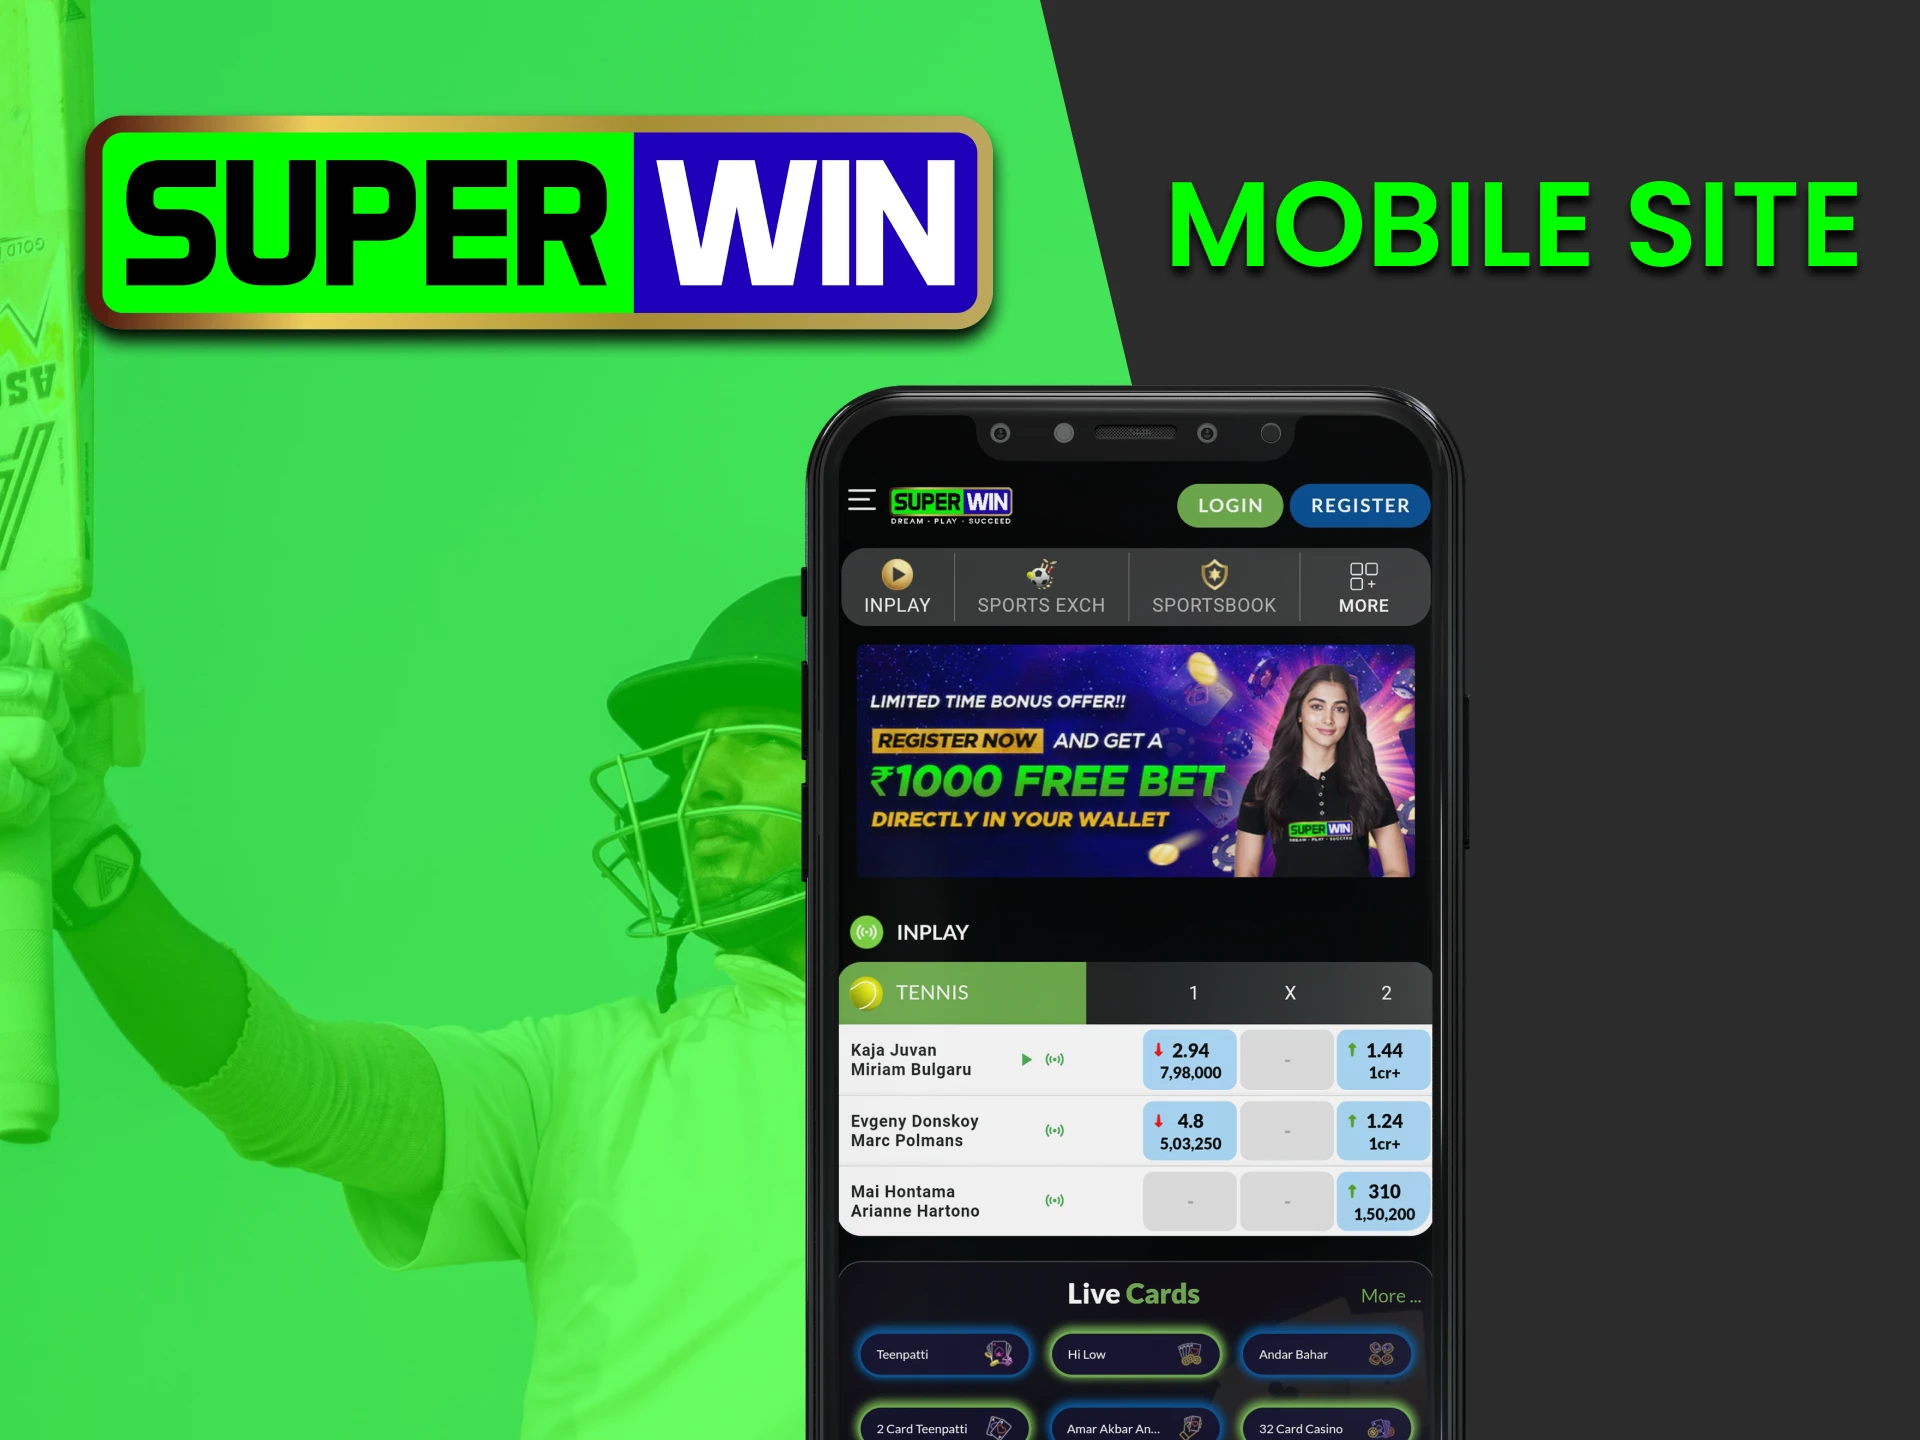 You can use the mobile version of the Superwin website for betting and gaming.